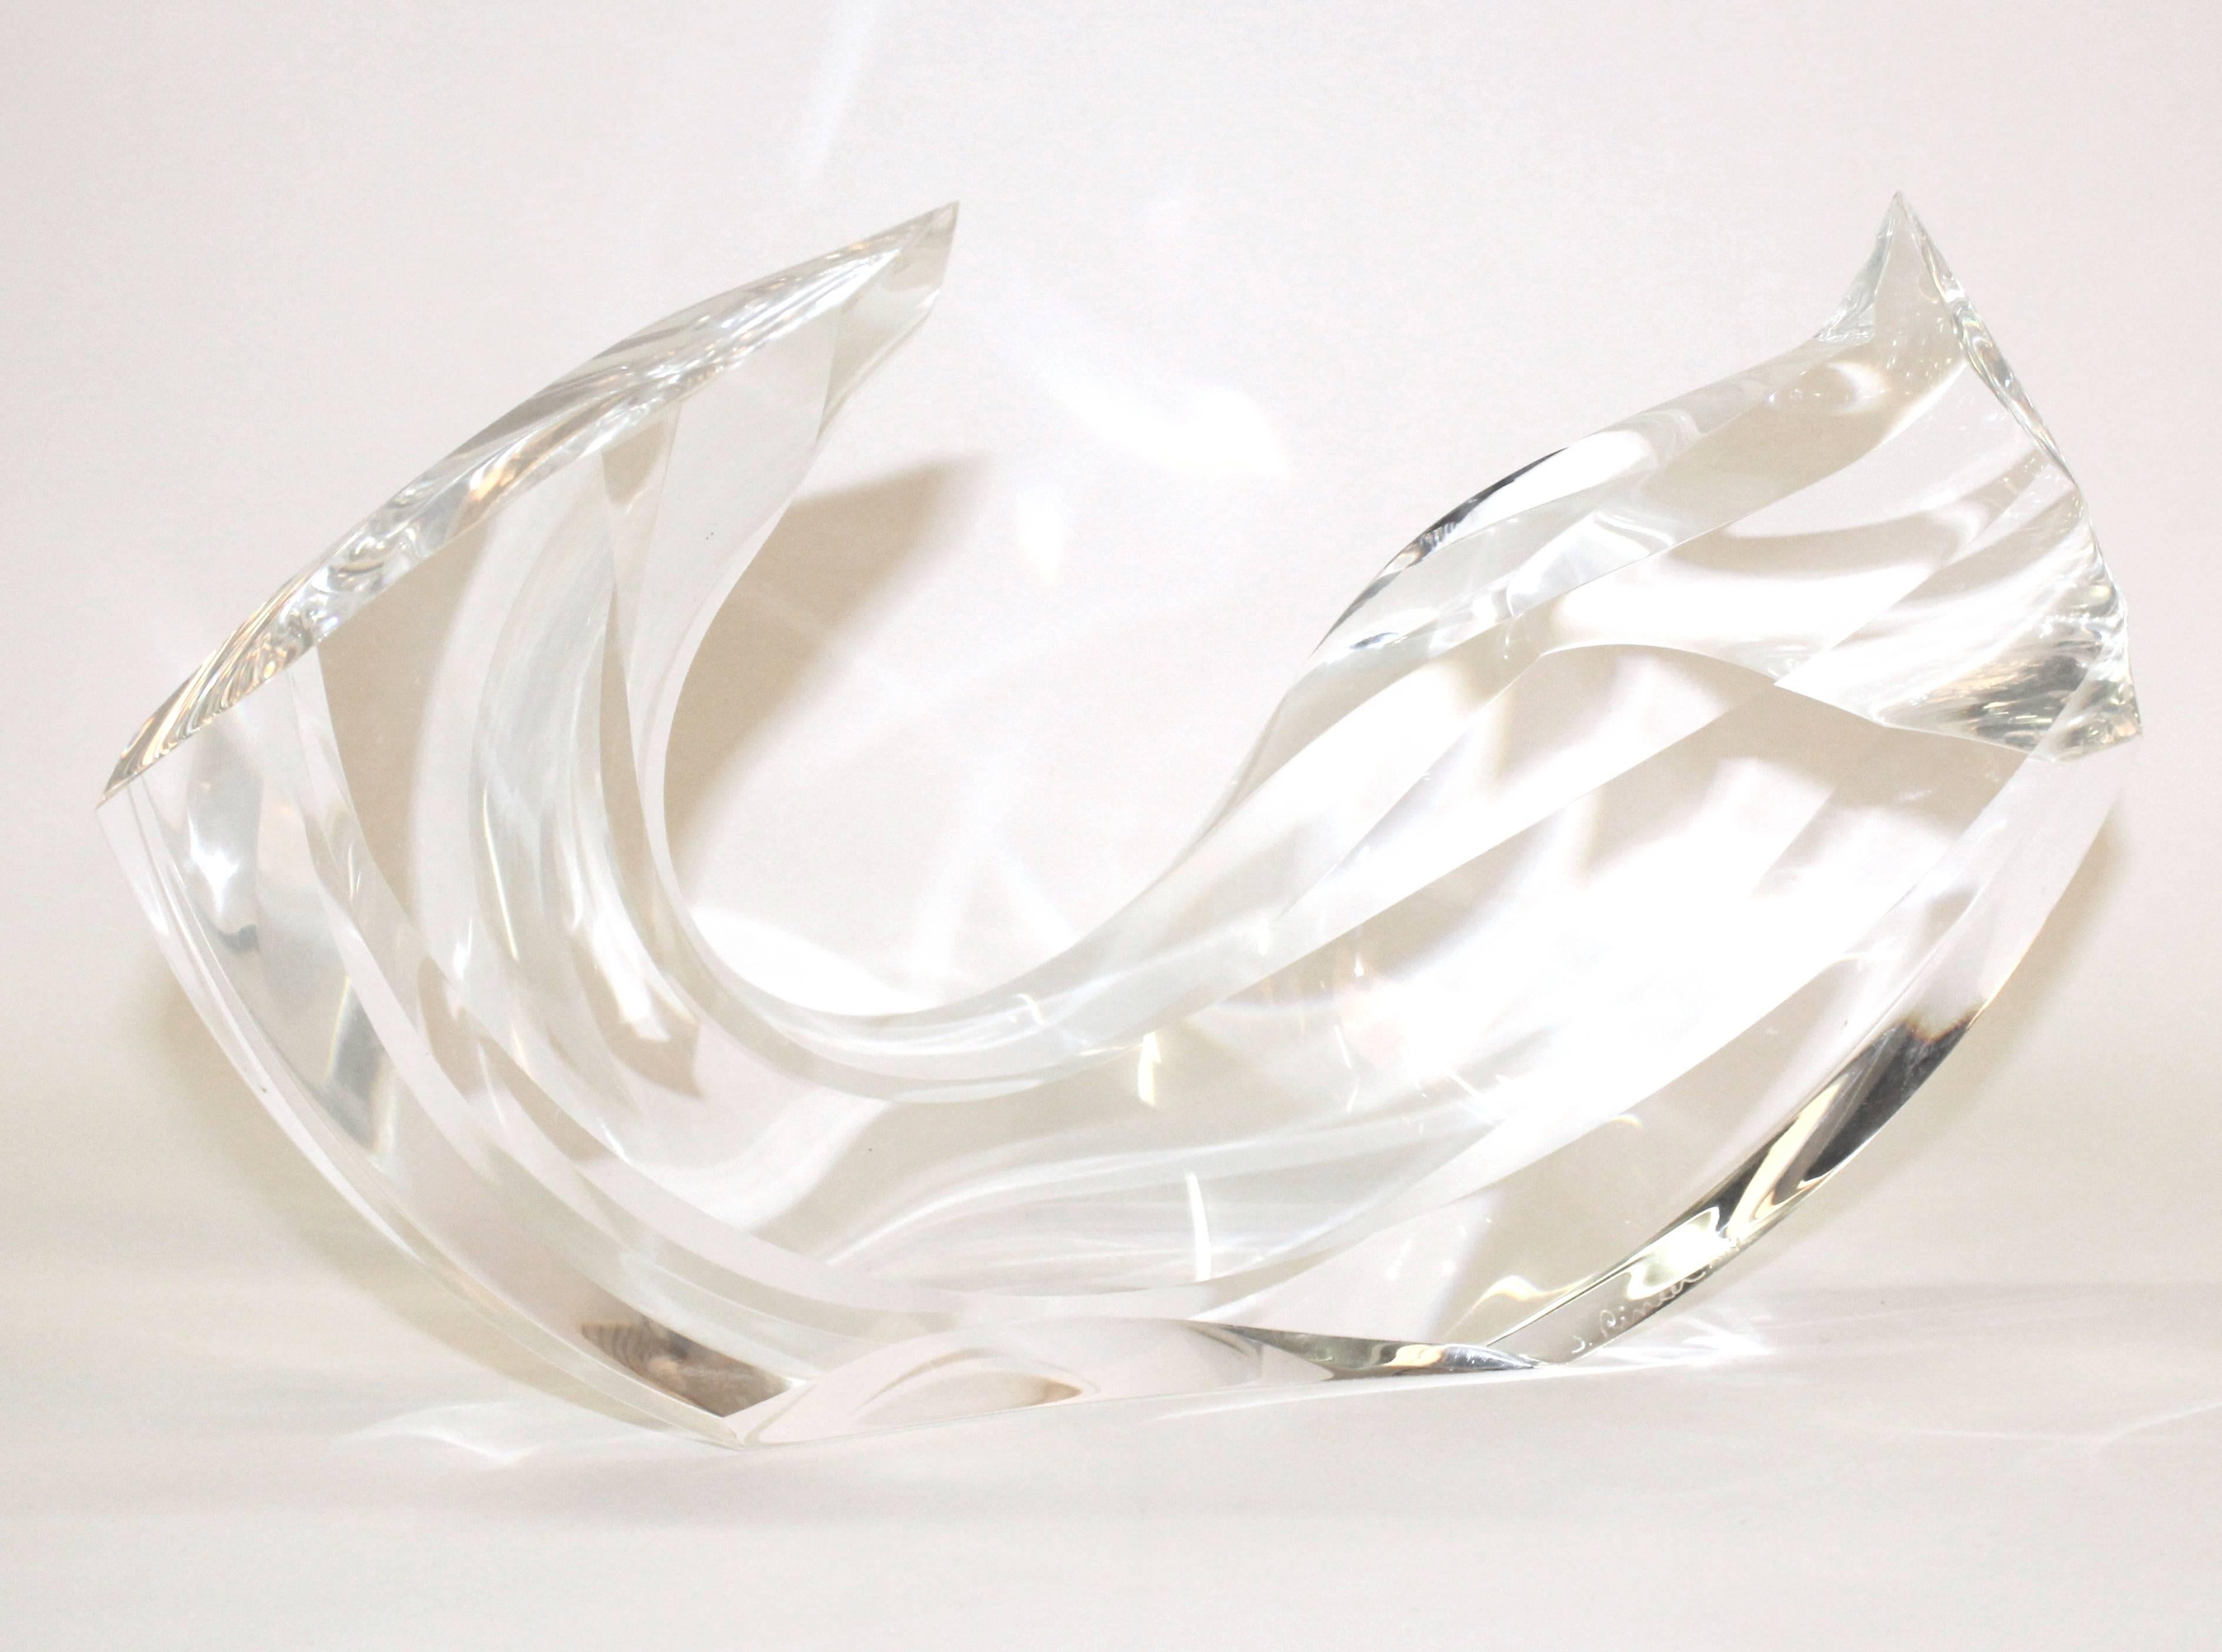 A signed abstract modern arch form sculpture, produced circa 1970s, in clear Lucite. Markings include the artist's signature [J. Rineer] numbered [A16] to the base. Excellent vintage condition, consistent with age and use.

110069